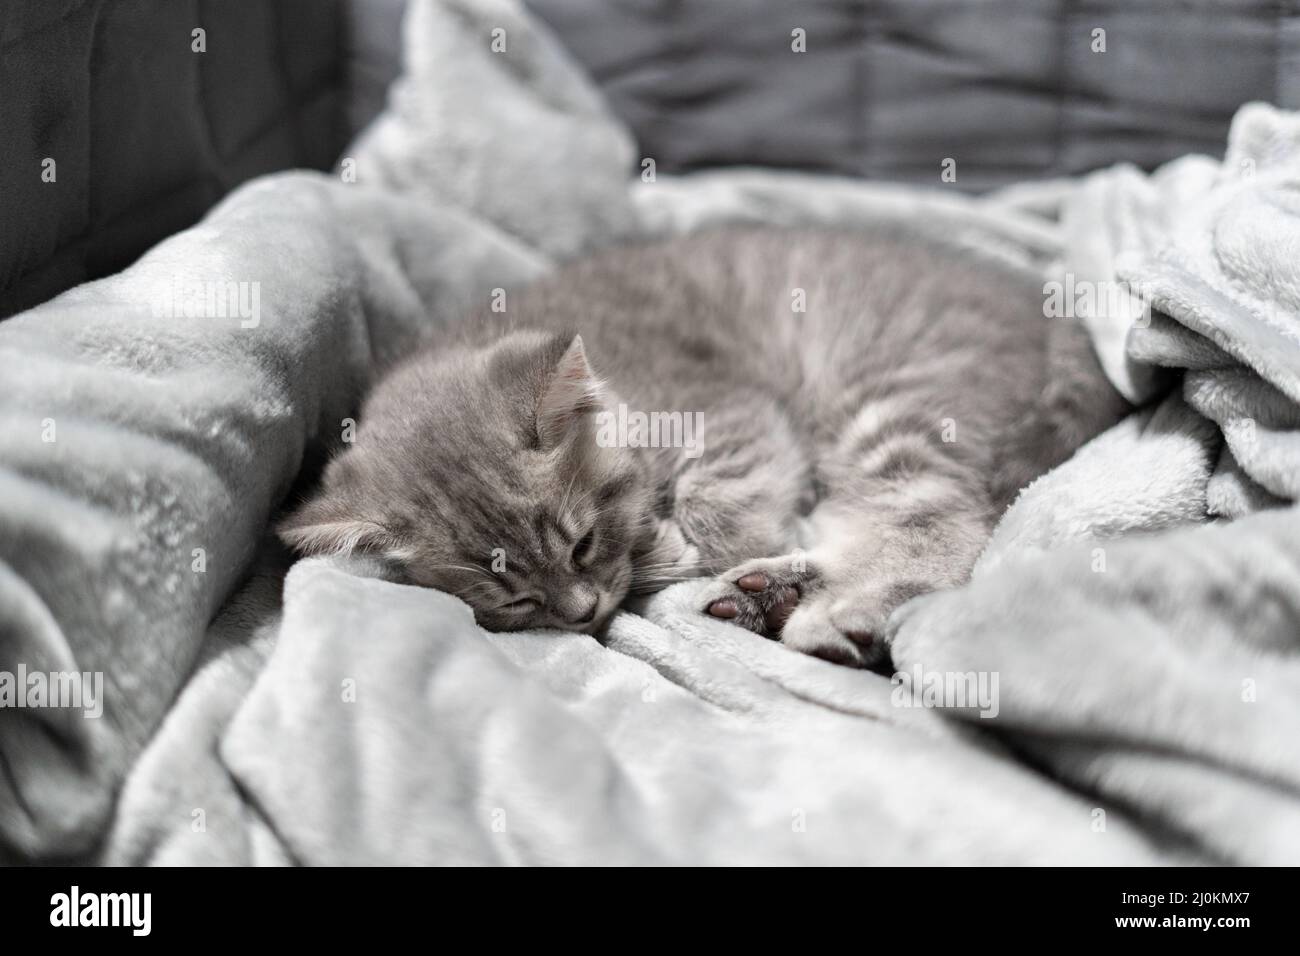 Adorable little pet. Cute child animal. Cute little kitten of gray color of Scottish Straight breed is sleeping sweetly on bedsp Stock Photo